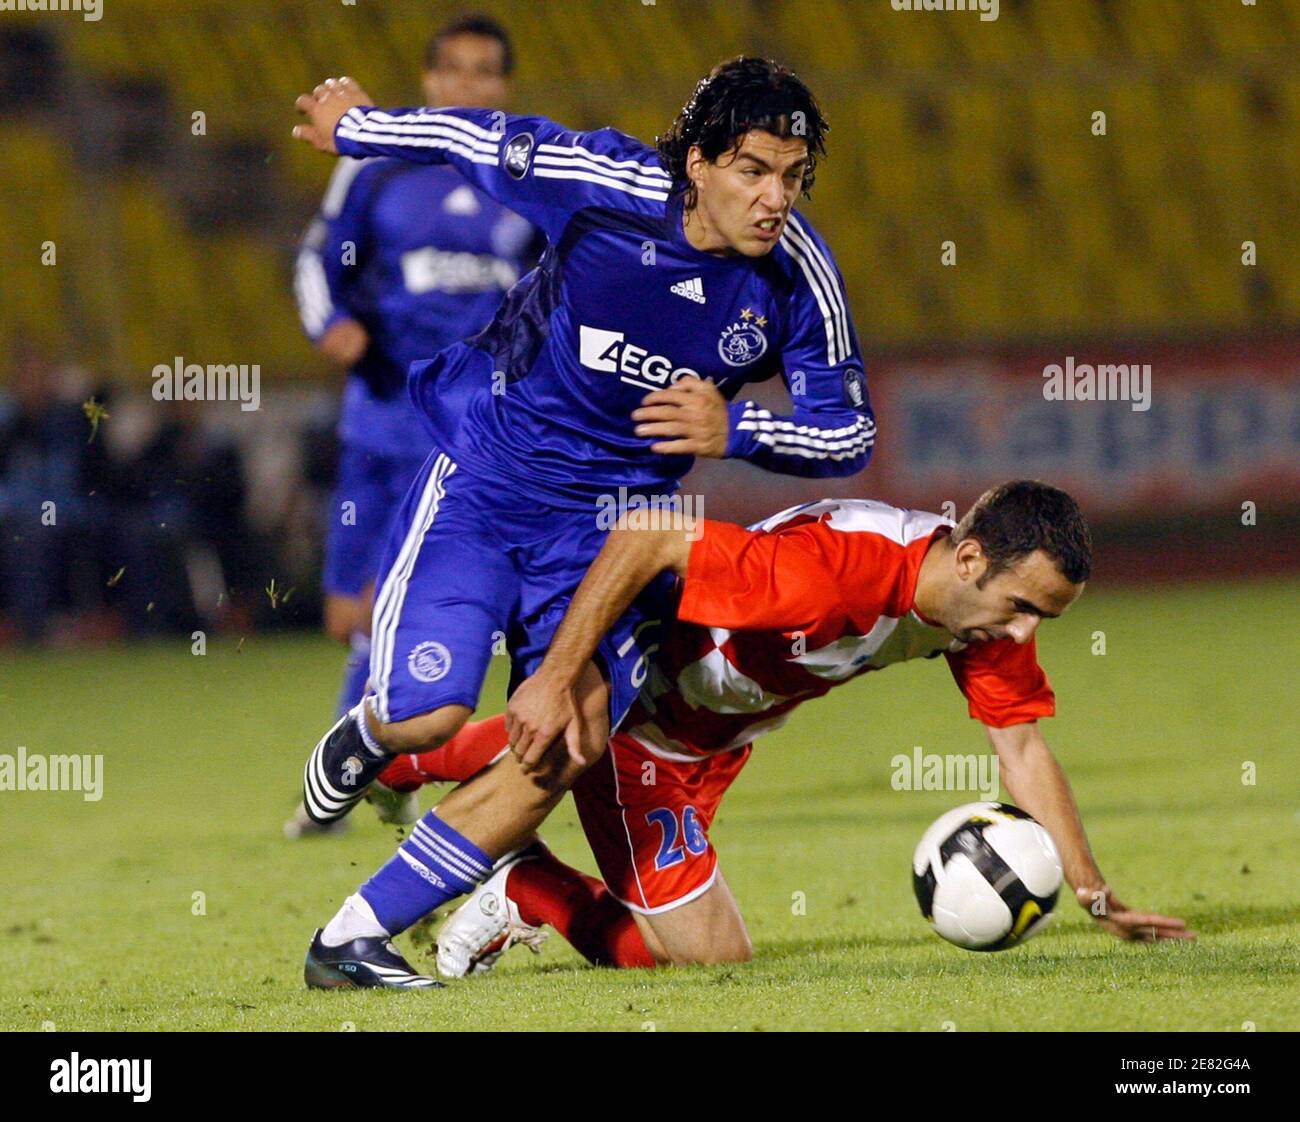 Ajax's Luis Suarez (L) struggles for the ball with Borac's Slavko Maric during their UEFA Cup soccer match in Belgrade September 18, 2008.  REUTERS/Ivan Milutinovic  (SERBIA) Stock Photo